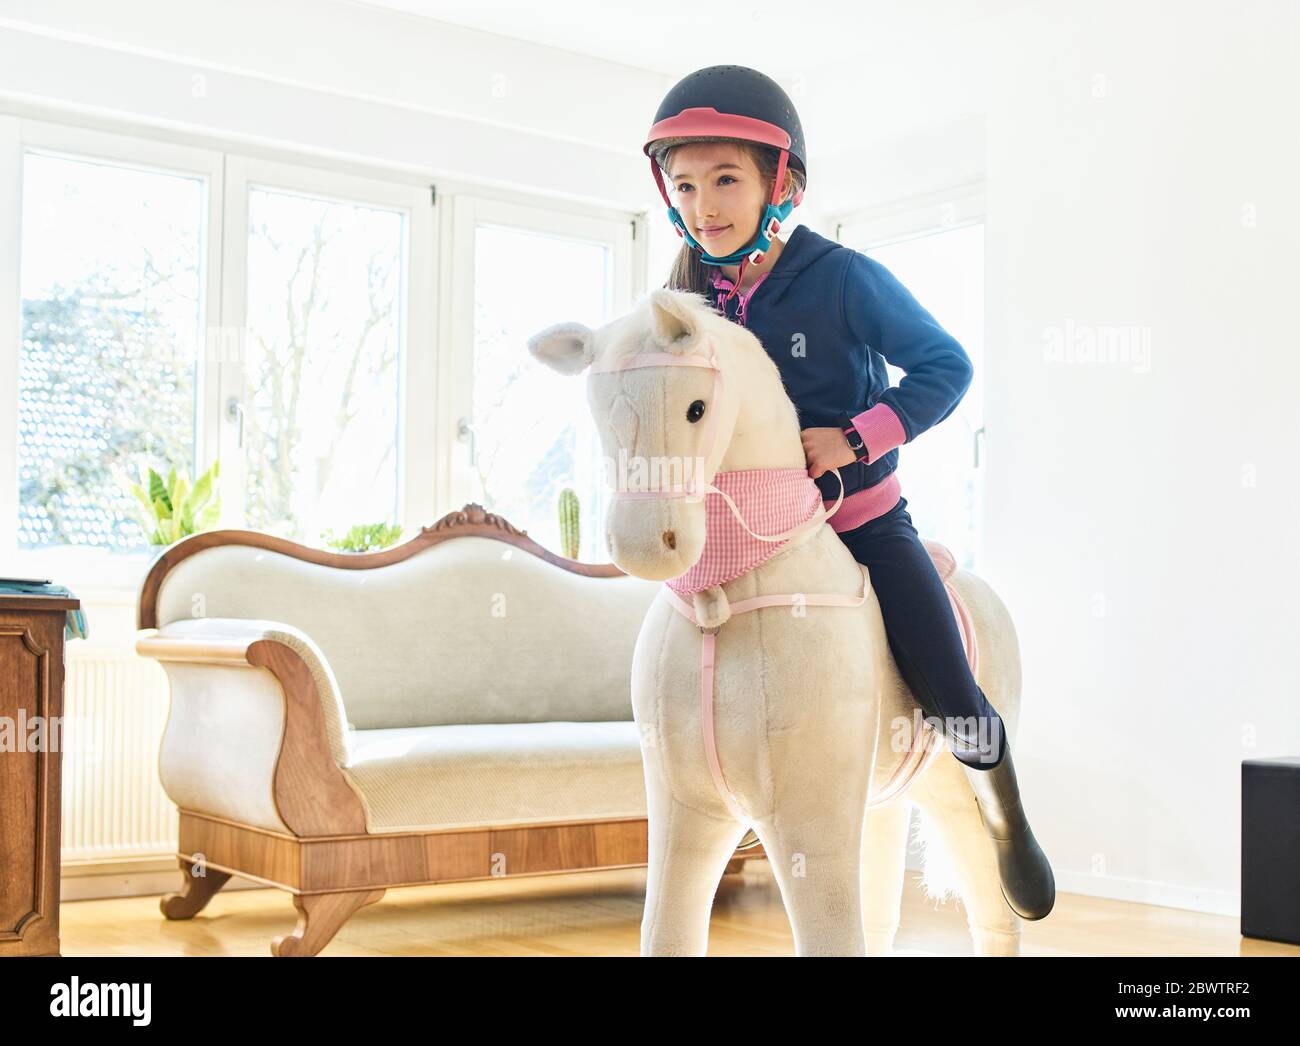 Girl riding on play horse at home Stock Photo